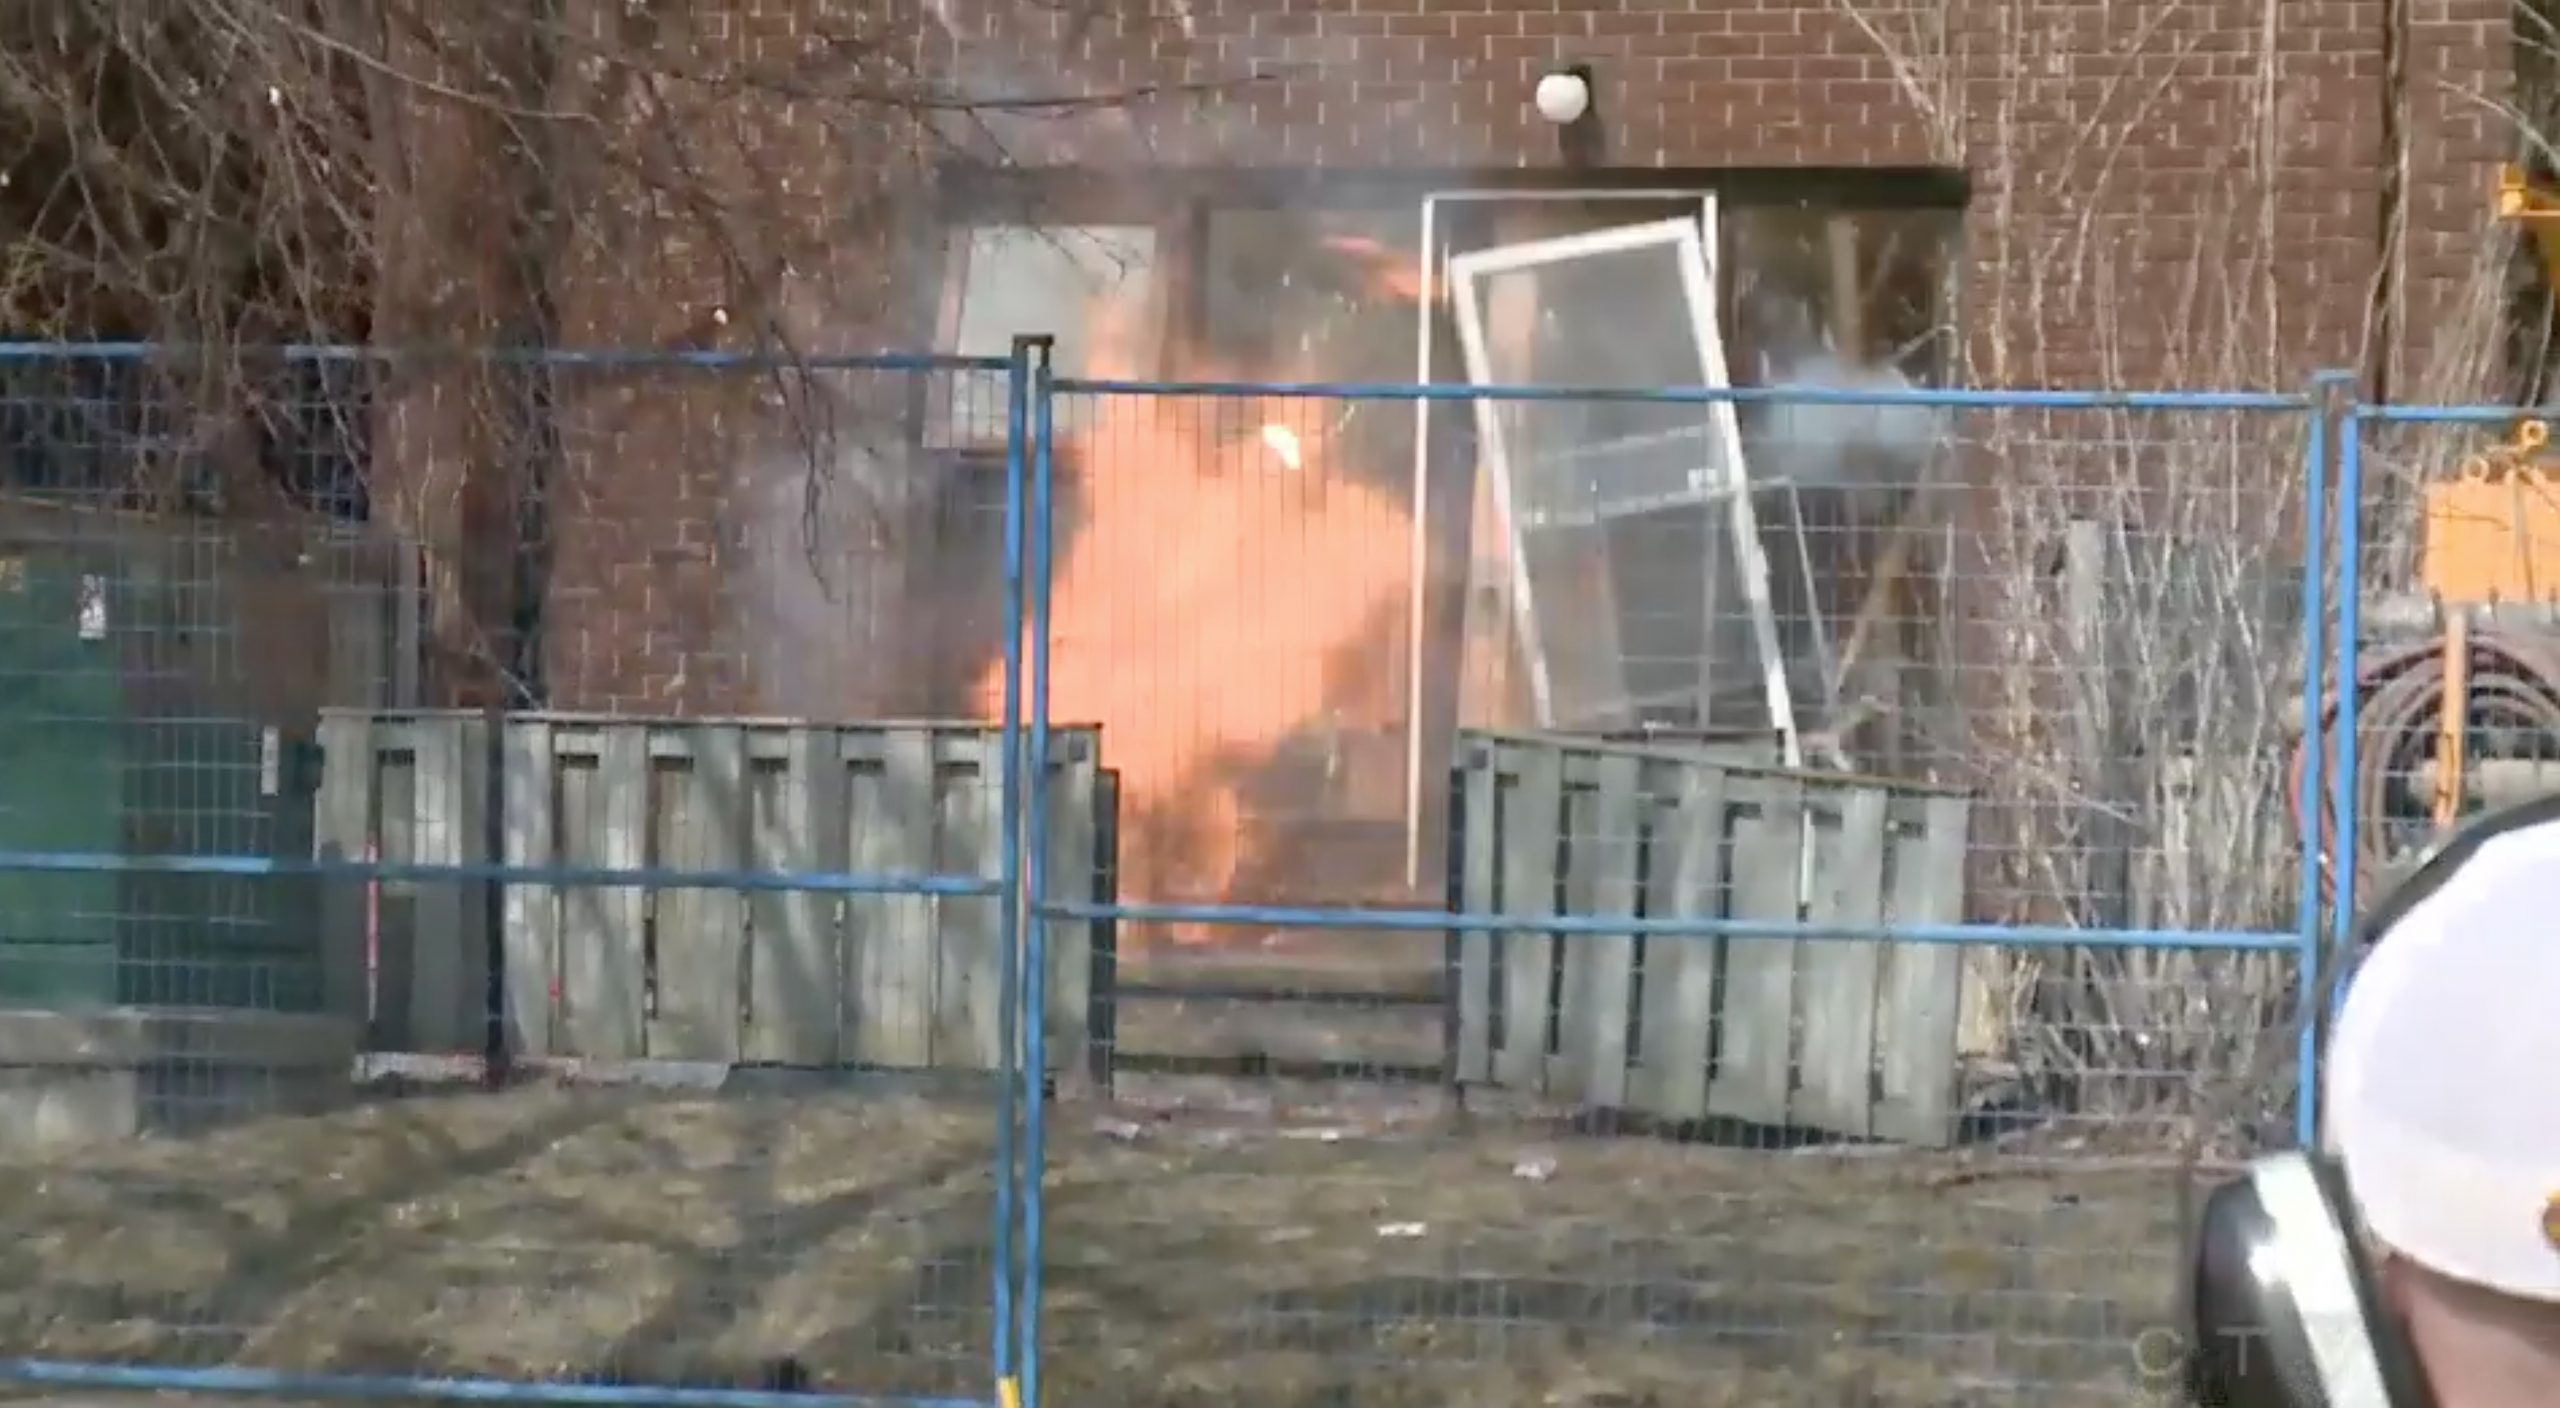 Fire is seen after an explosion in a Heron Gate Village townhouse by Ottawa Police Services.